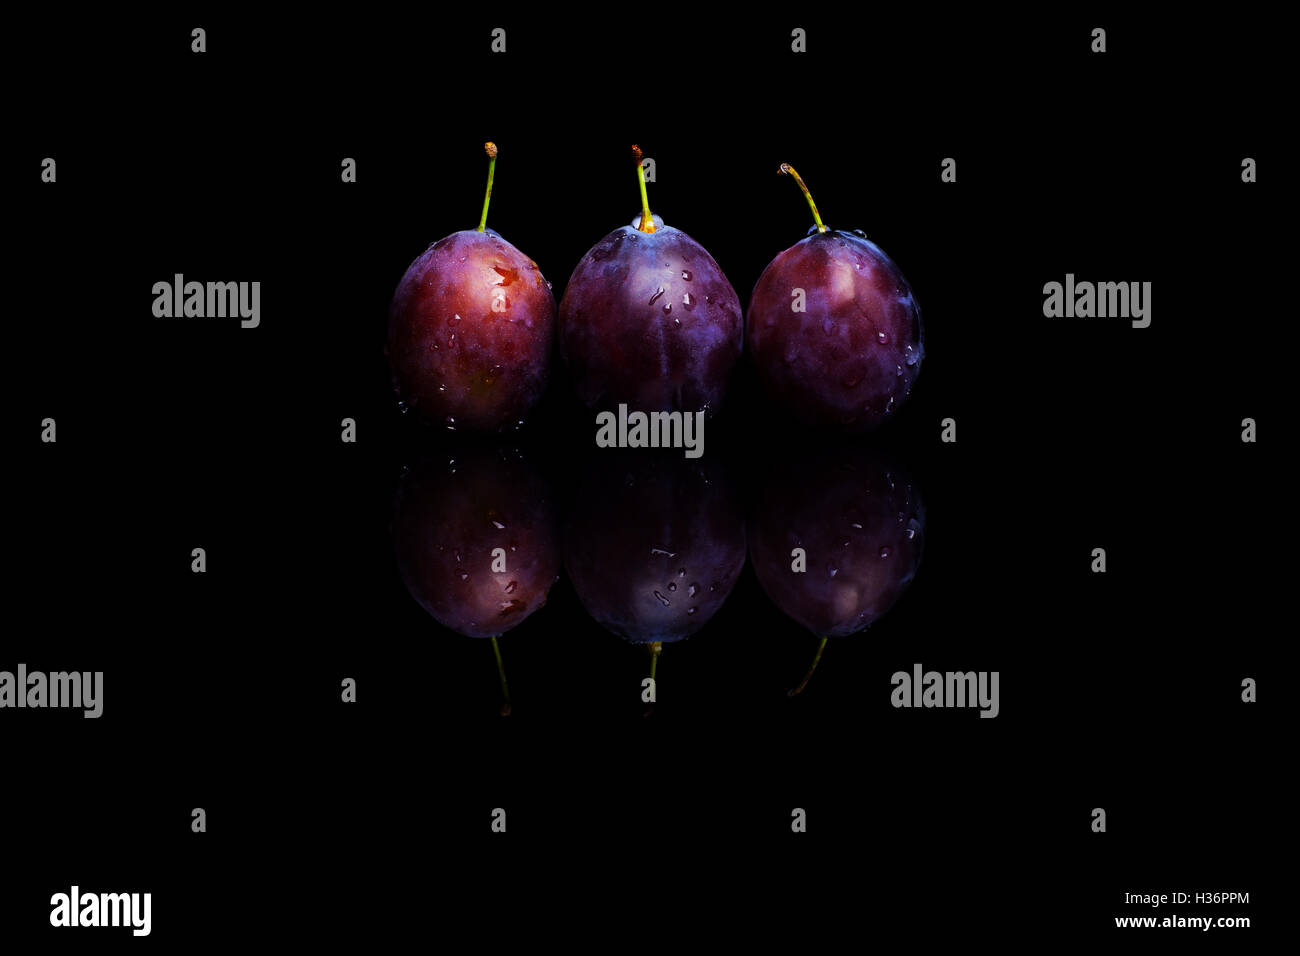 Three fresh blue plums on a black reflective background with water drops Stock Photo